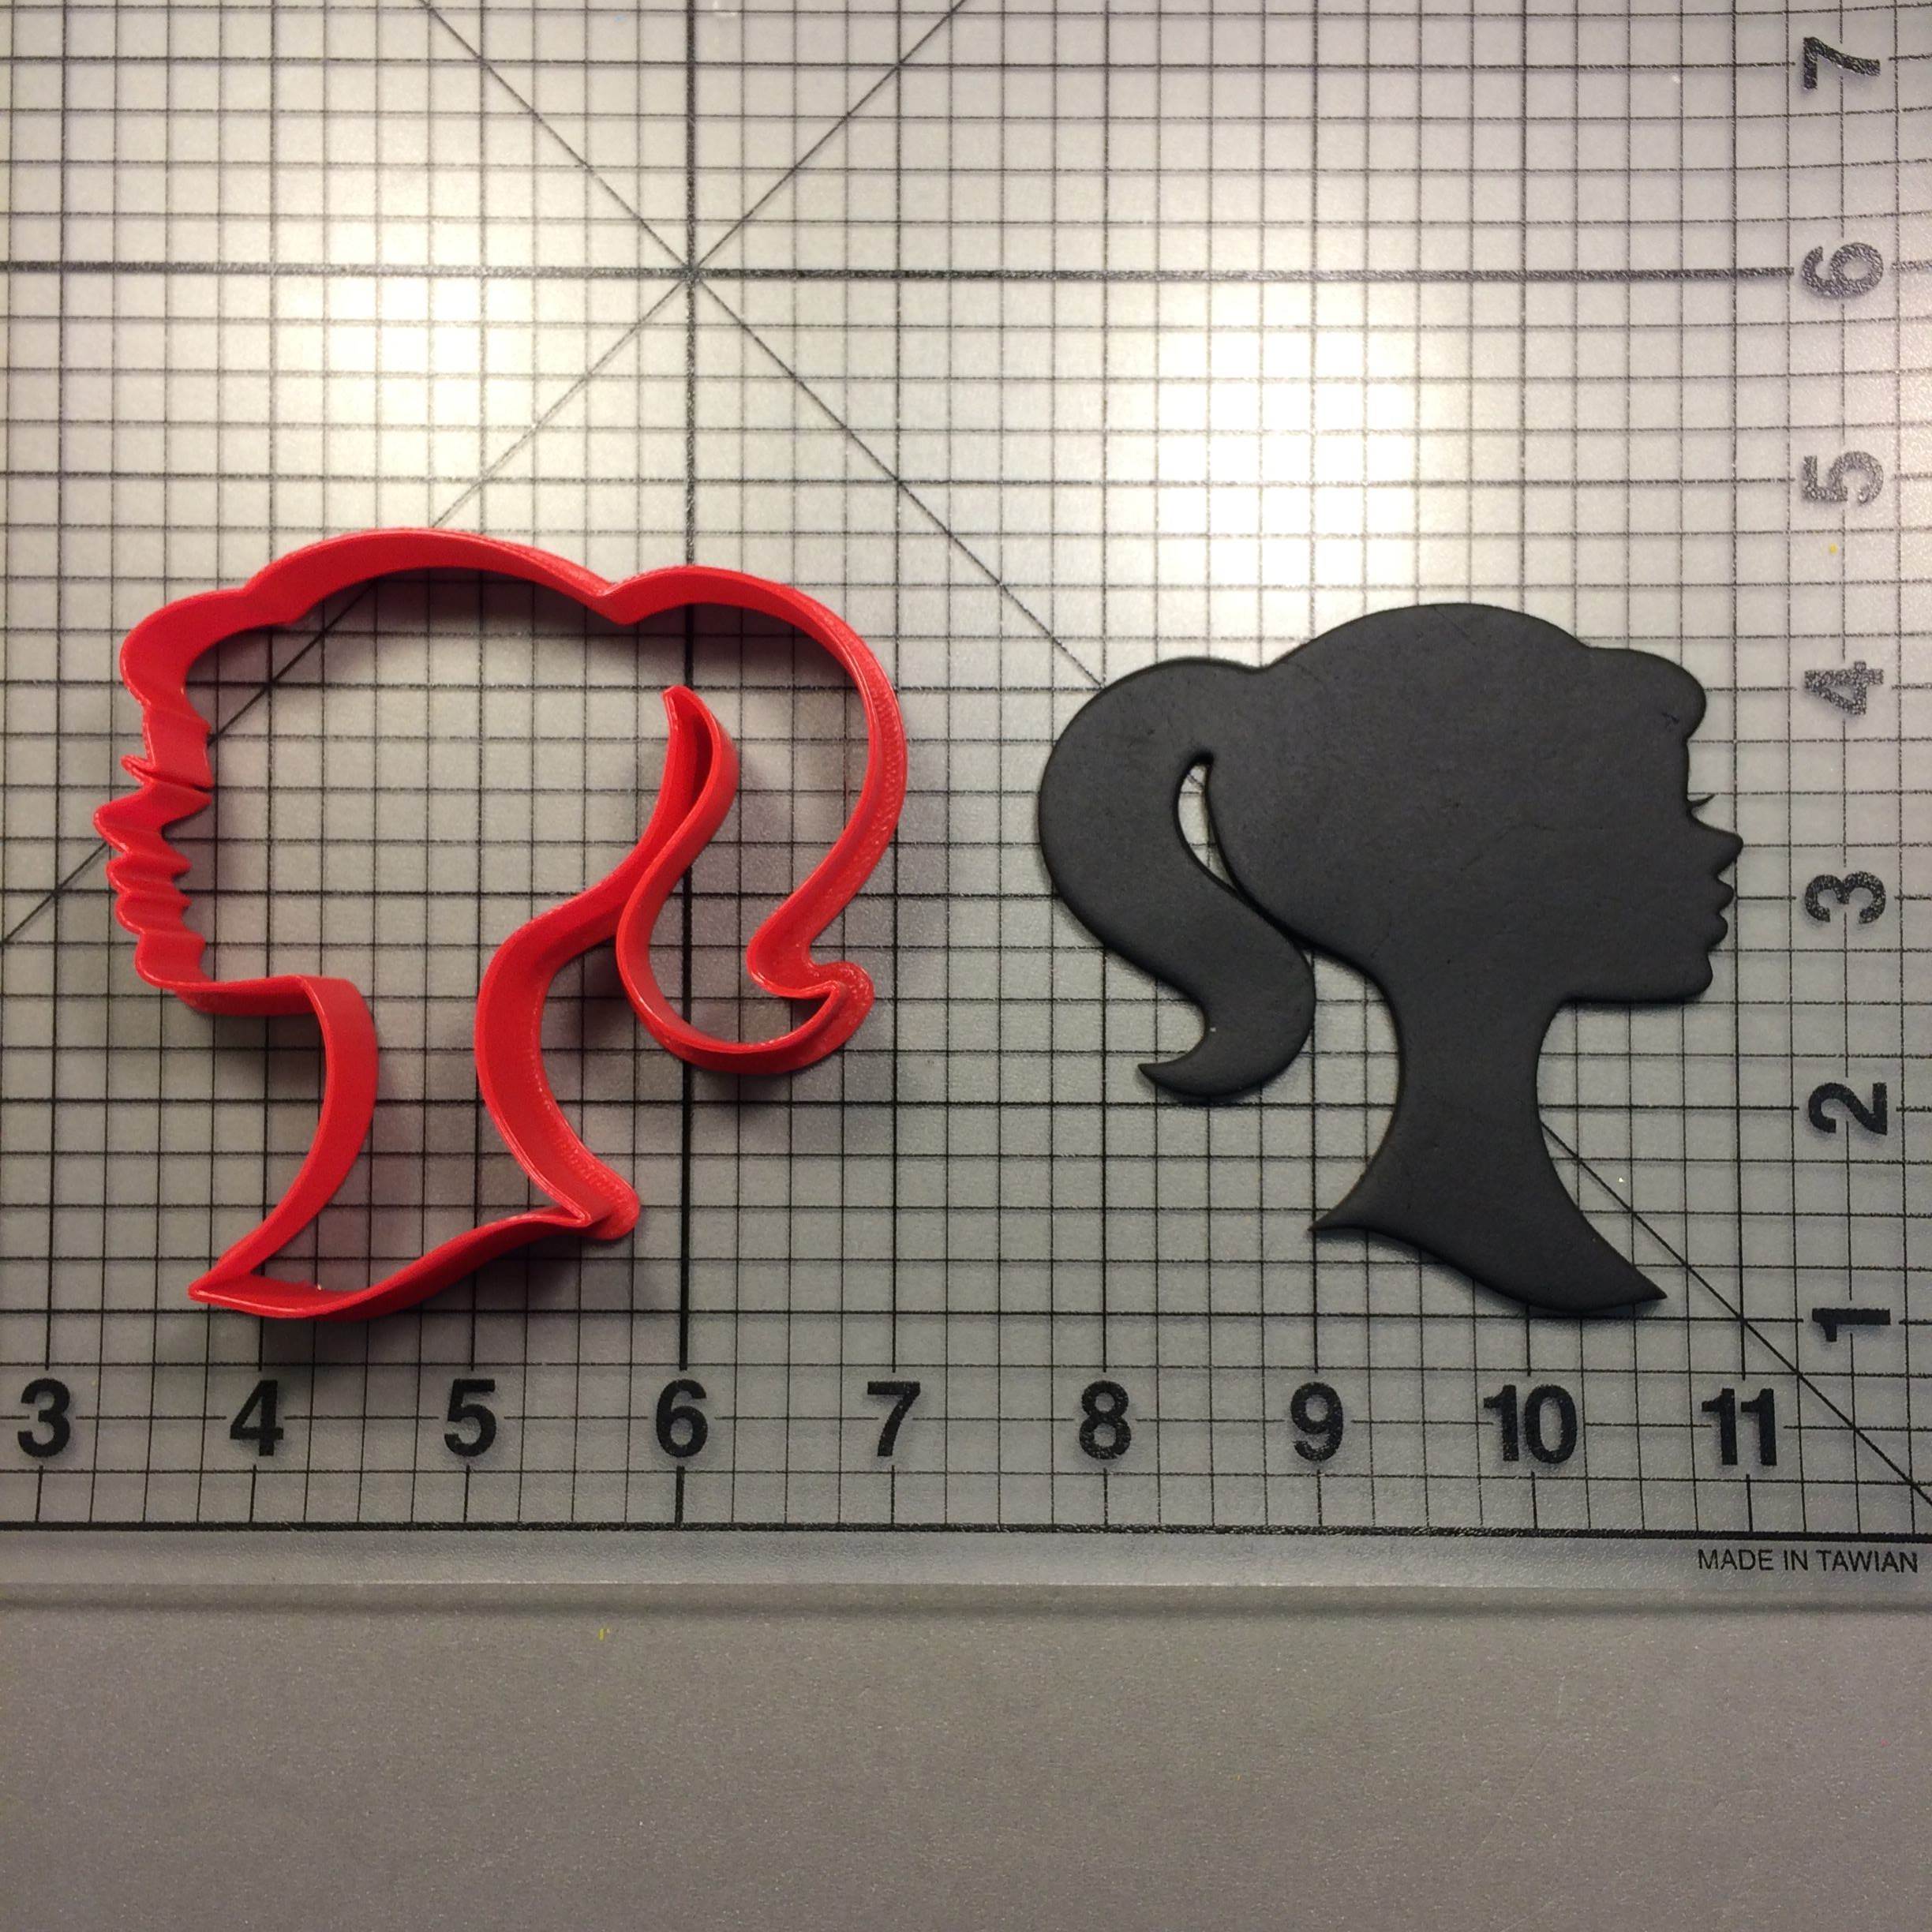 Barbie Sillouette Cookie Cutter 3D Printed